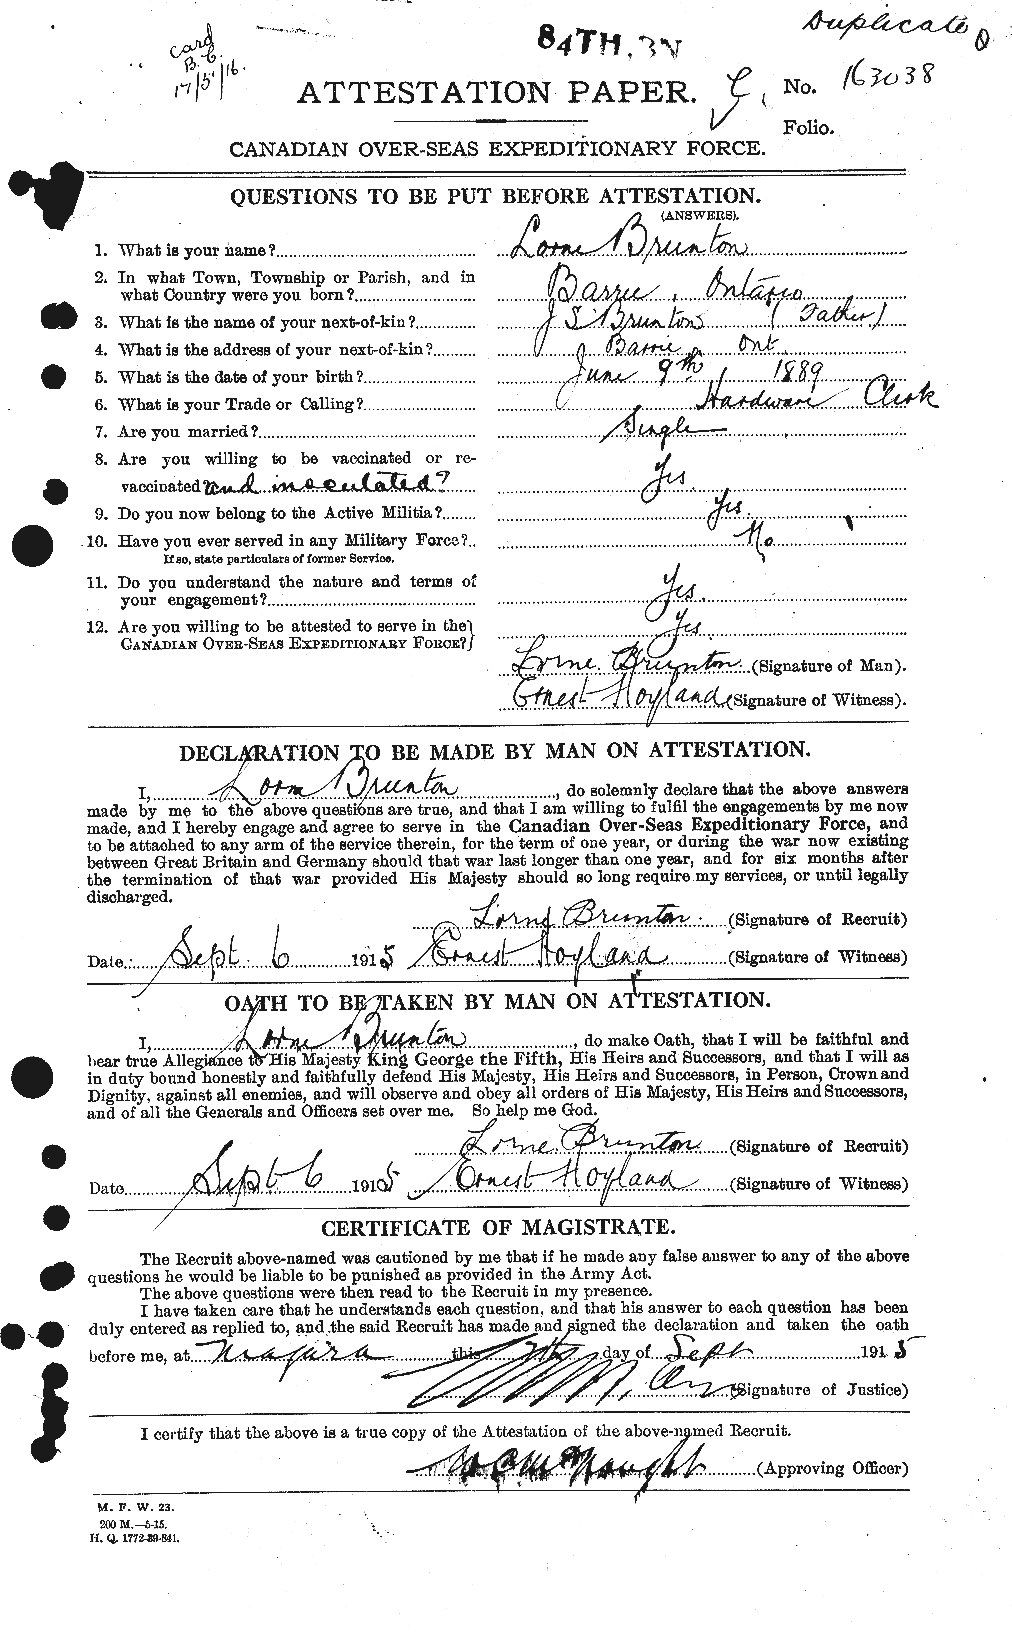 Personnel Records of the First World War - CEF 268640a